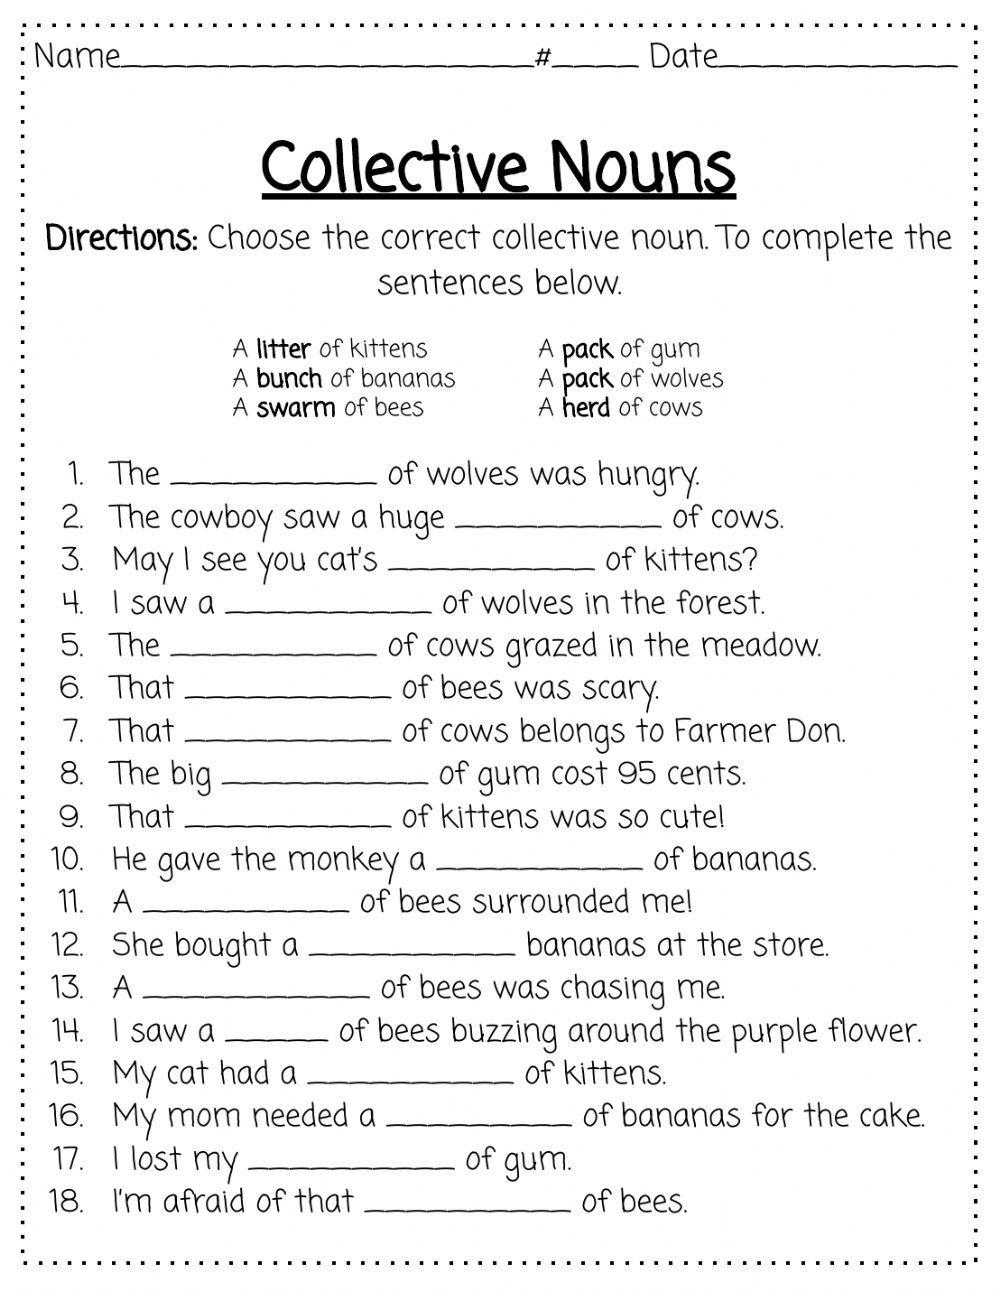 collective-nouns-activity-for-2-live-worksheets